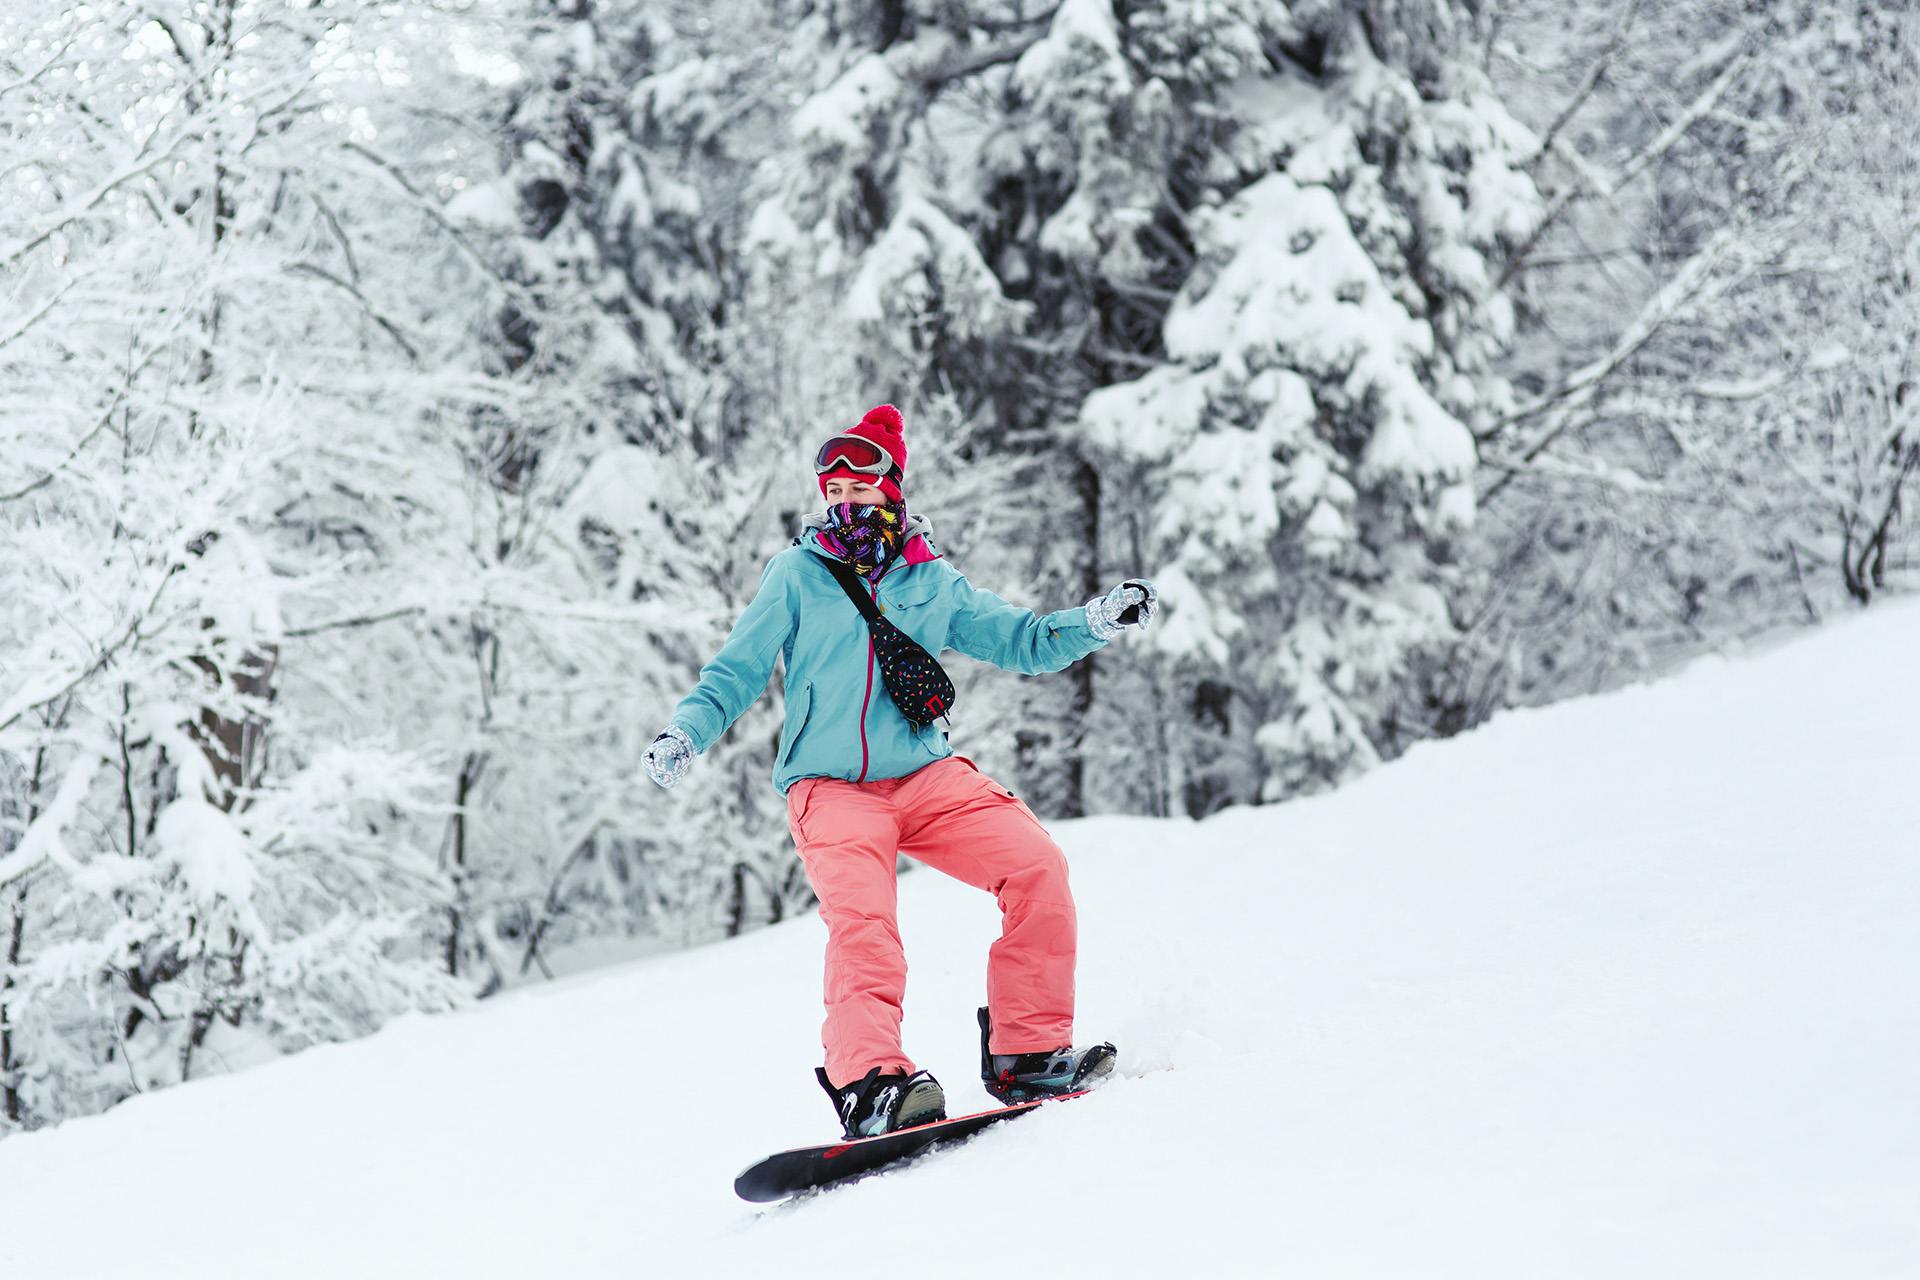 Woman in blue ski jacket and pink pants stands on the snowboard somewhere in winter forest